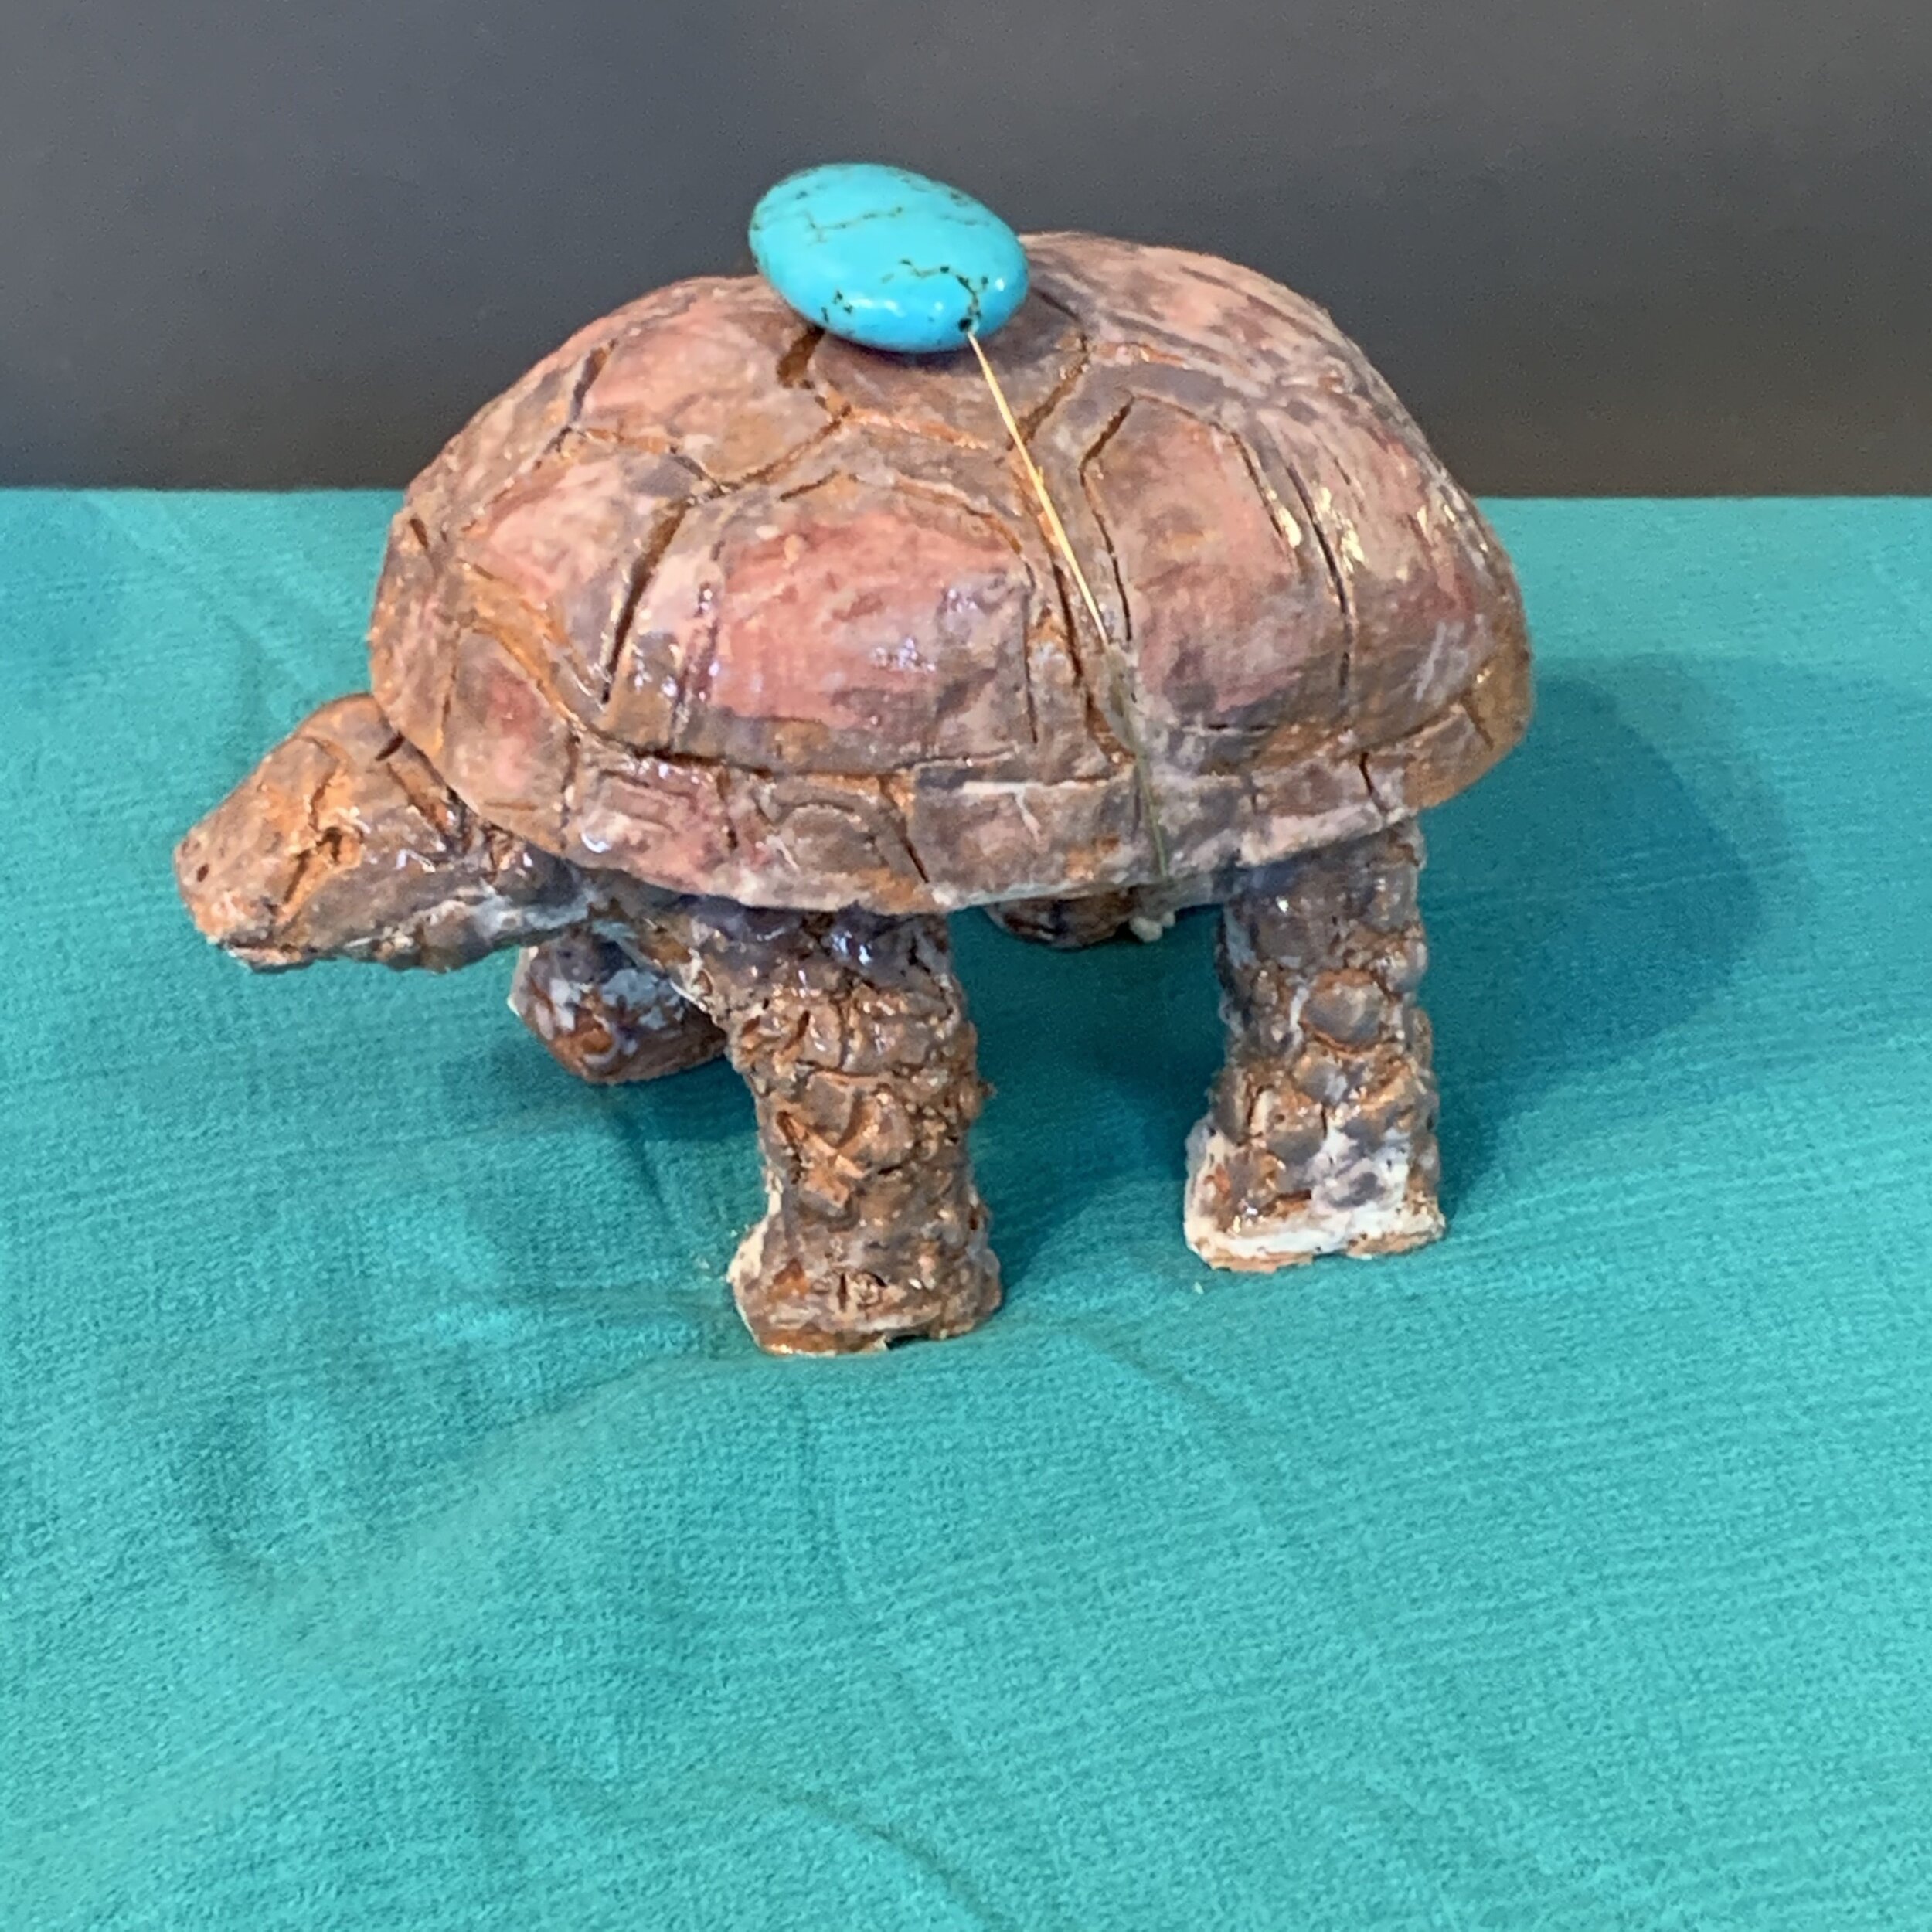   Tortoise, Spirit Animal Series  Clay and glaze  with turquoise stone and thread 6. 5 x 3.3x 4.5 in/16.5 x 8.3 x 11.4 cm. 2020 